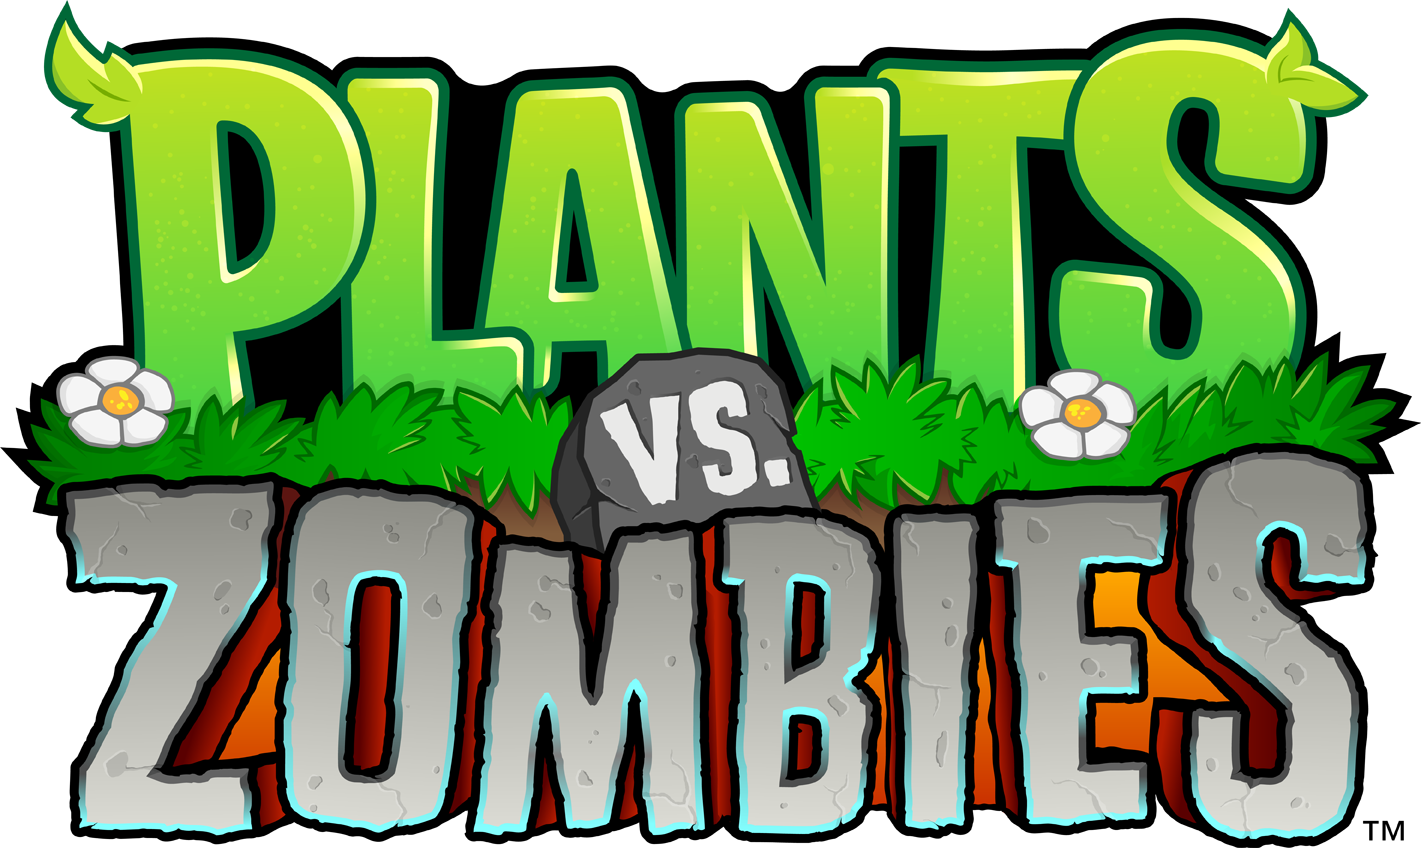 PopCap Announces 'Plants vs. Zombies 2' is Coming in "Early Summer